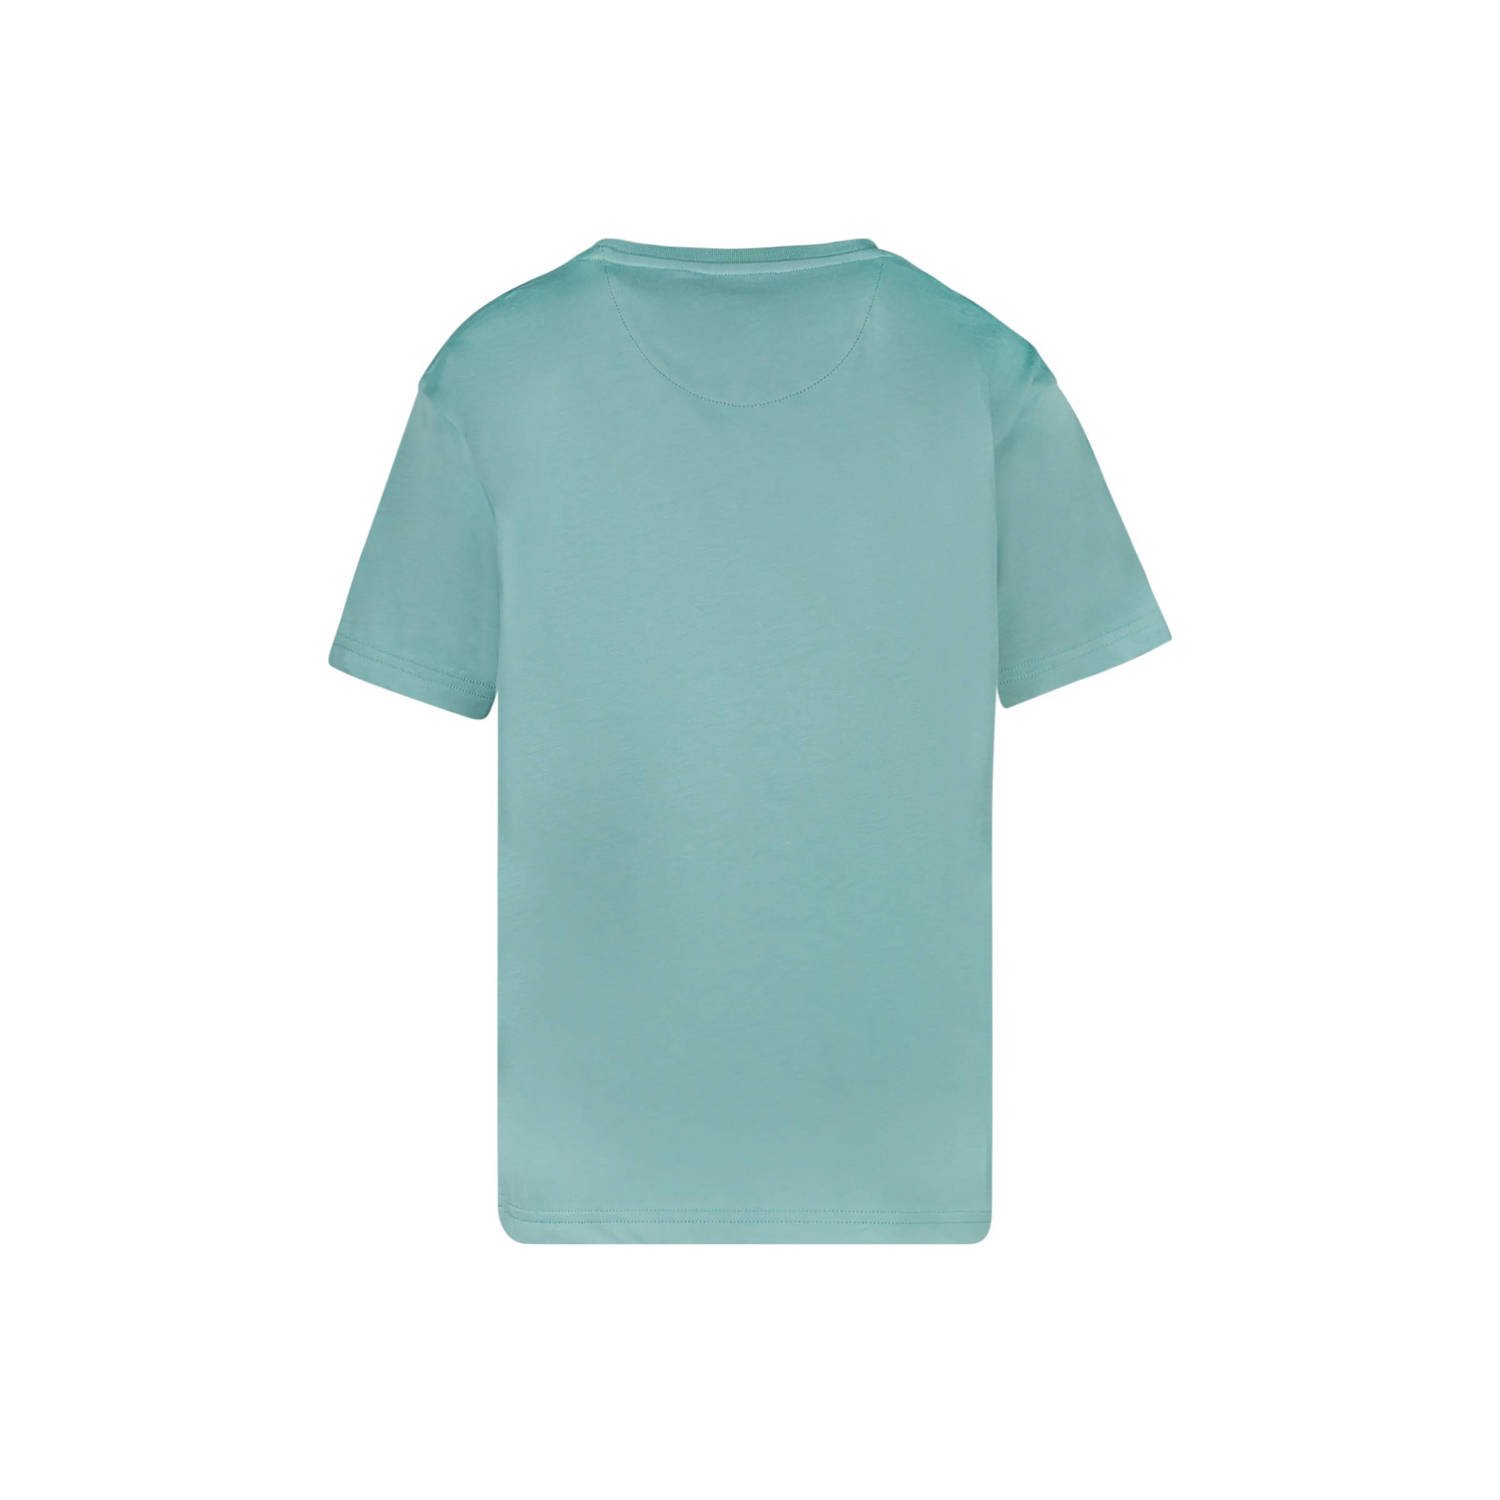 Cars T-shirt REBOOT turquoise